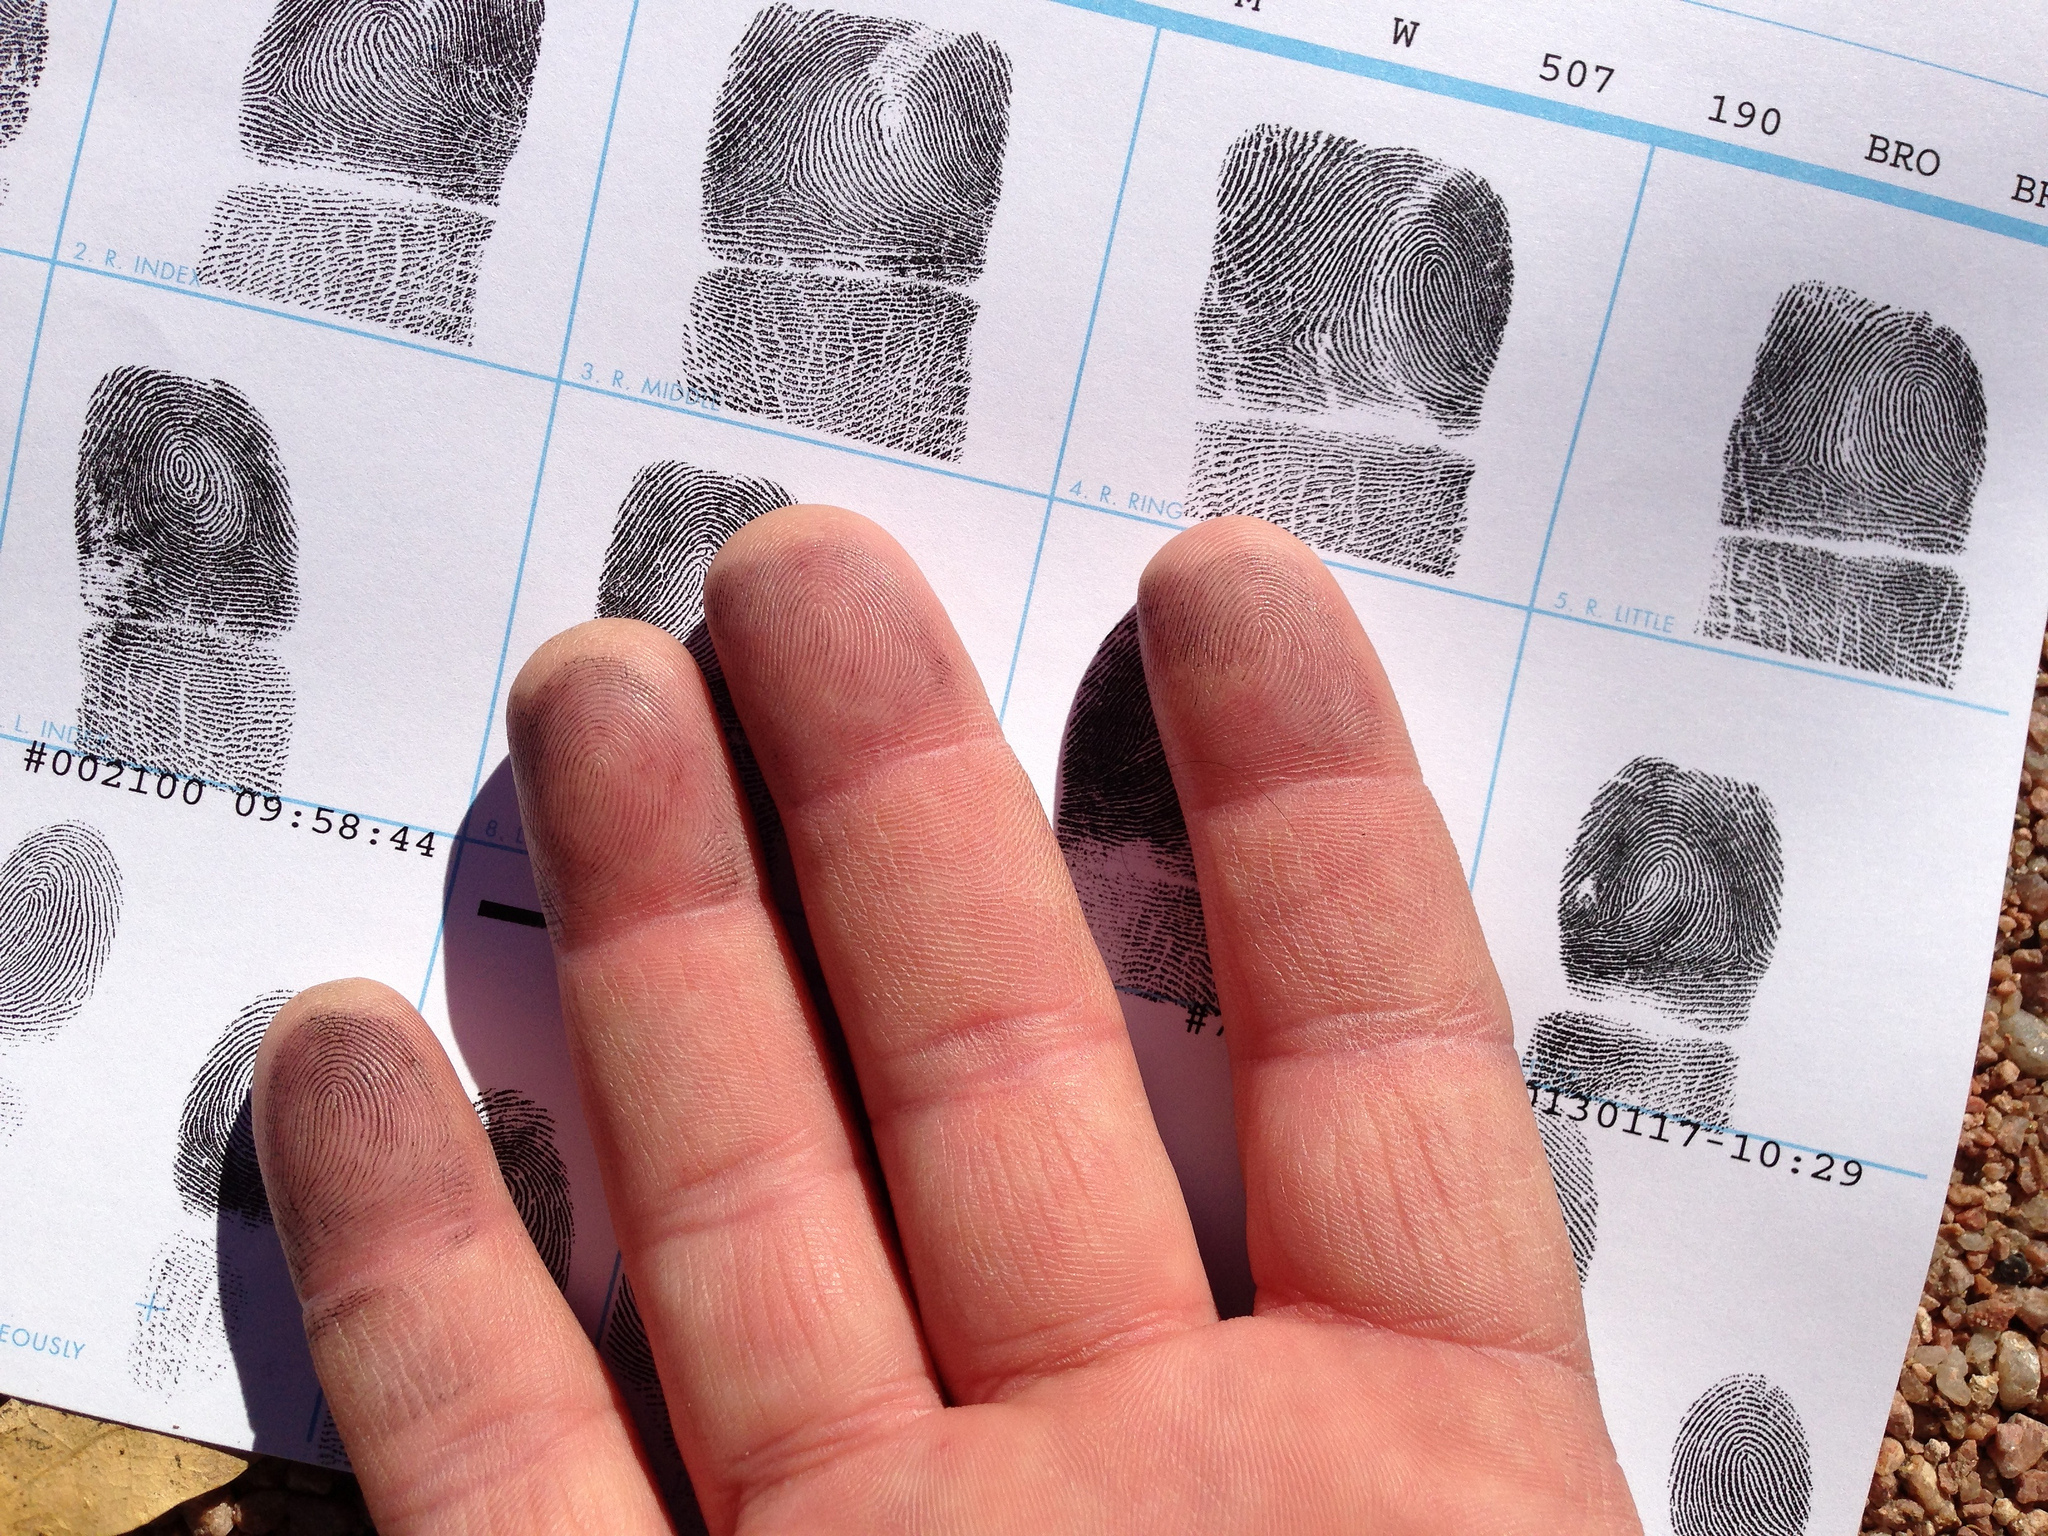 Image of a hand overlying a fingerprint sheet. Black ink is still visible on the fingers.